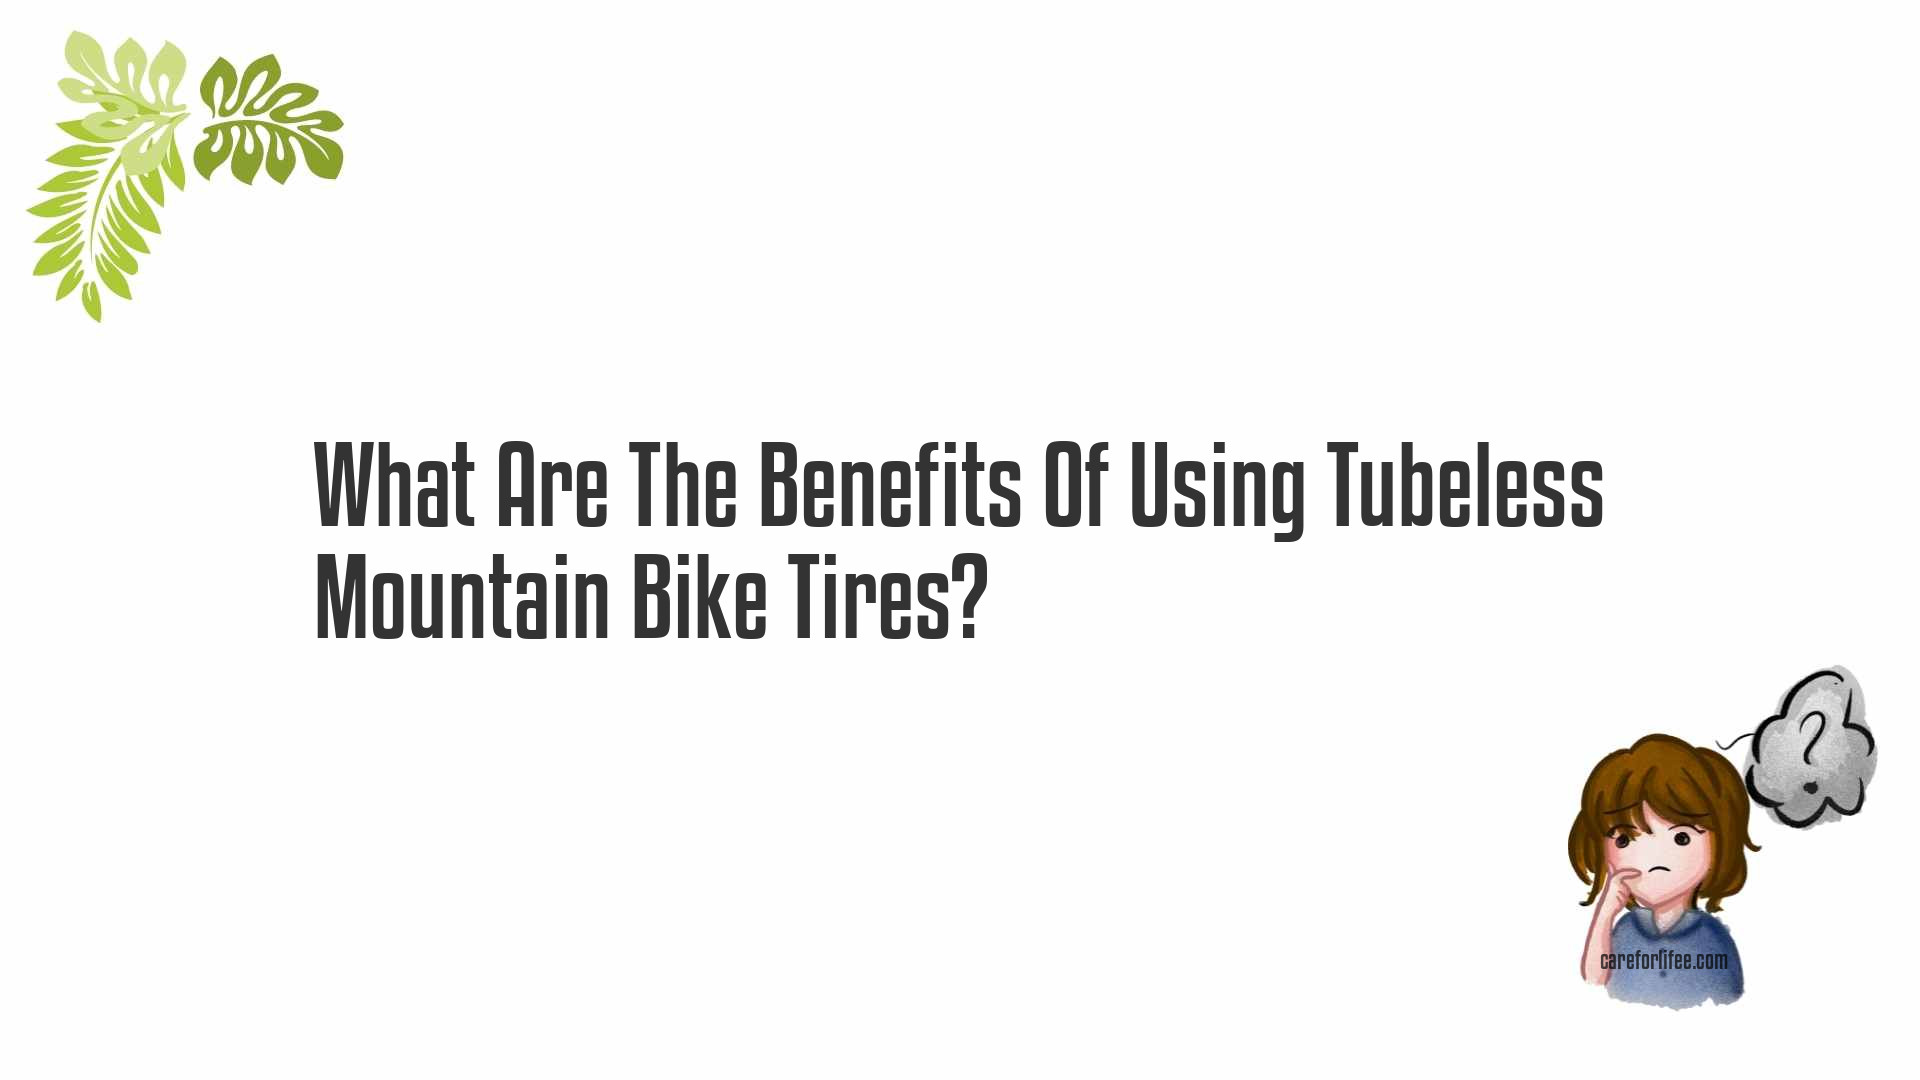 What Are The Benefits Of Using Tubeless Mountain Bike Tires?